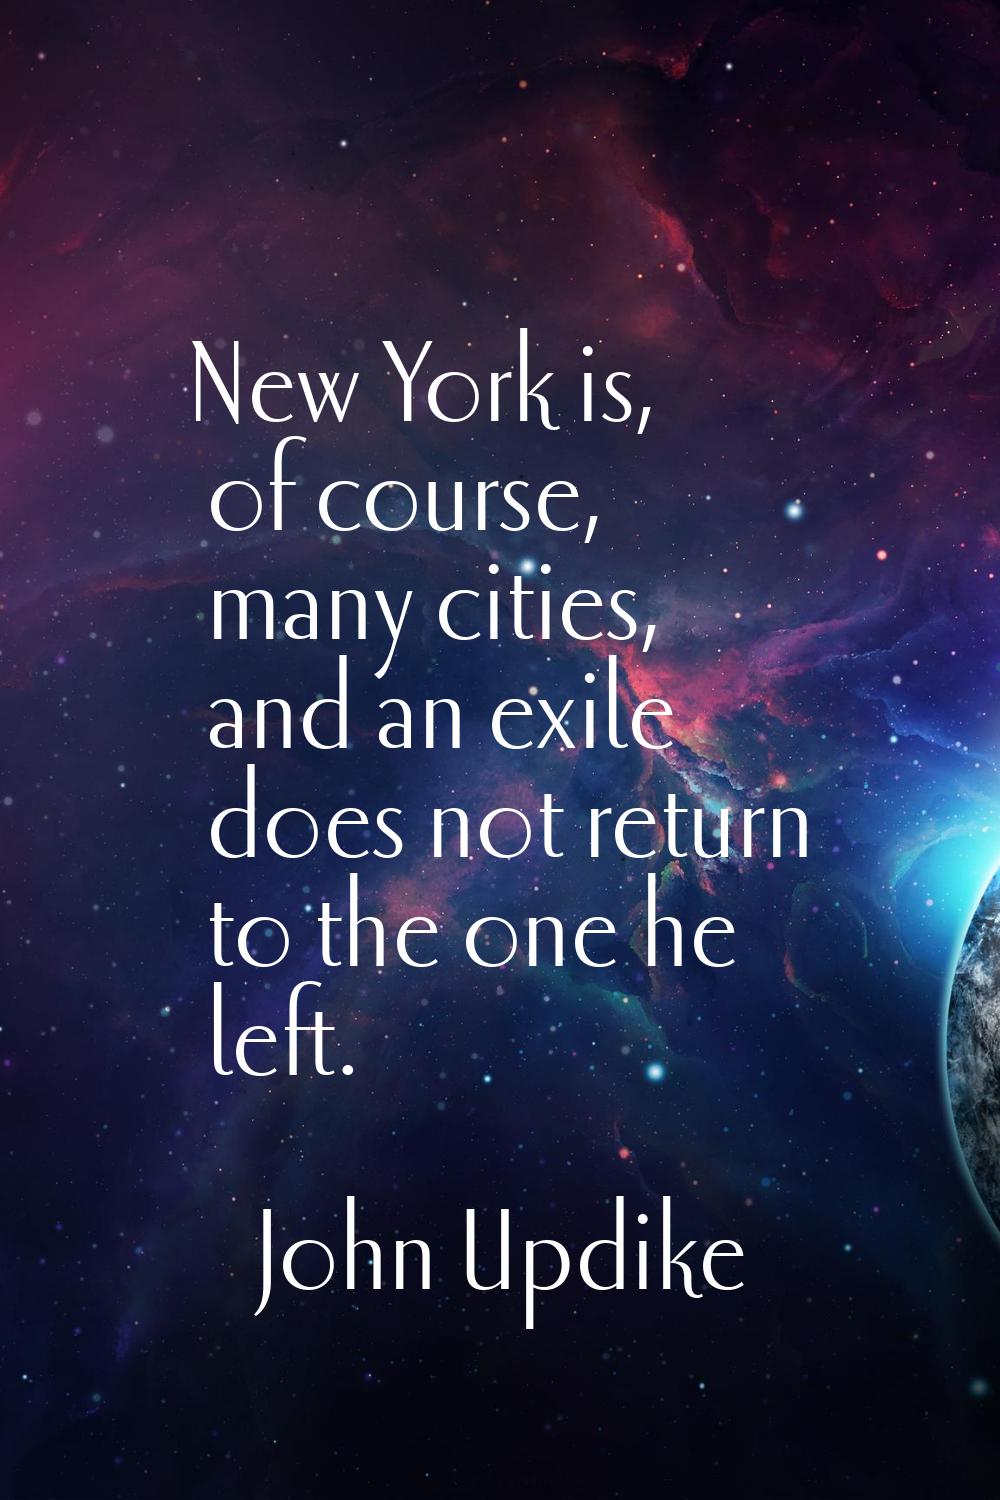 New York is, of course, many cities, and an exile does not return to the one he left.